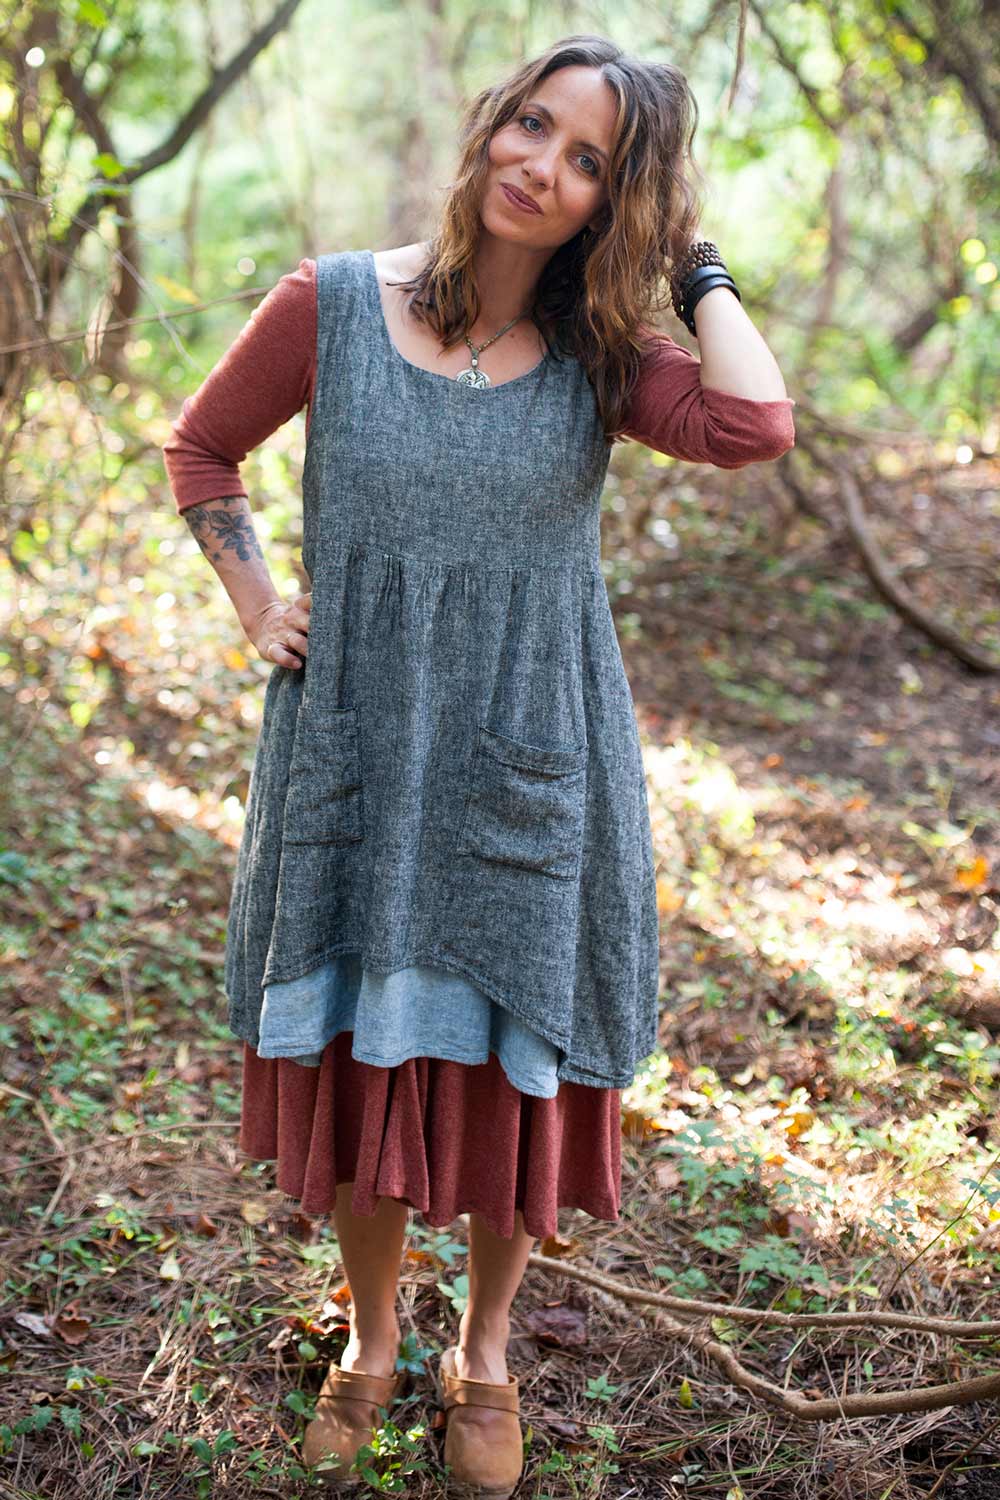 Metamorphic Dress Sewing Pattern by Sew Liberated 